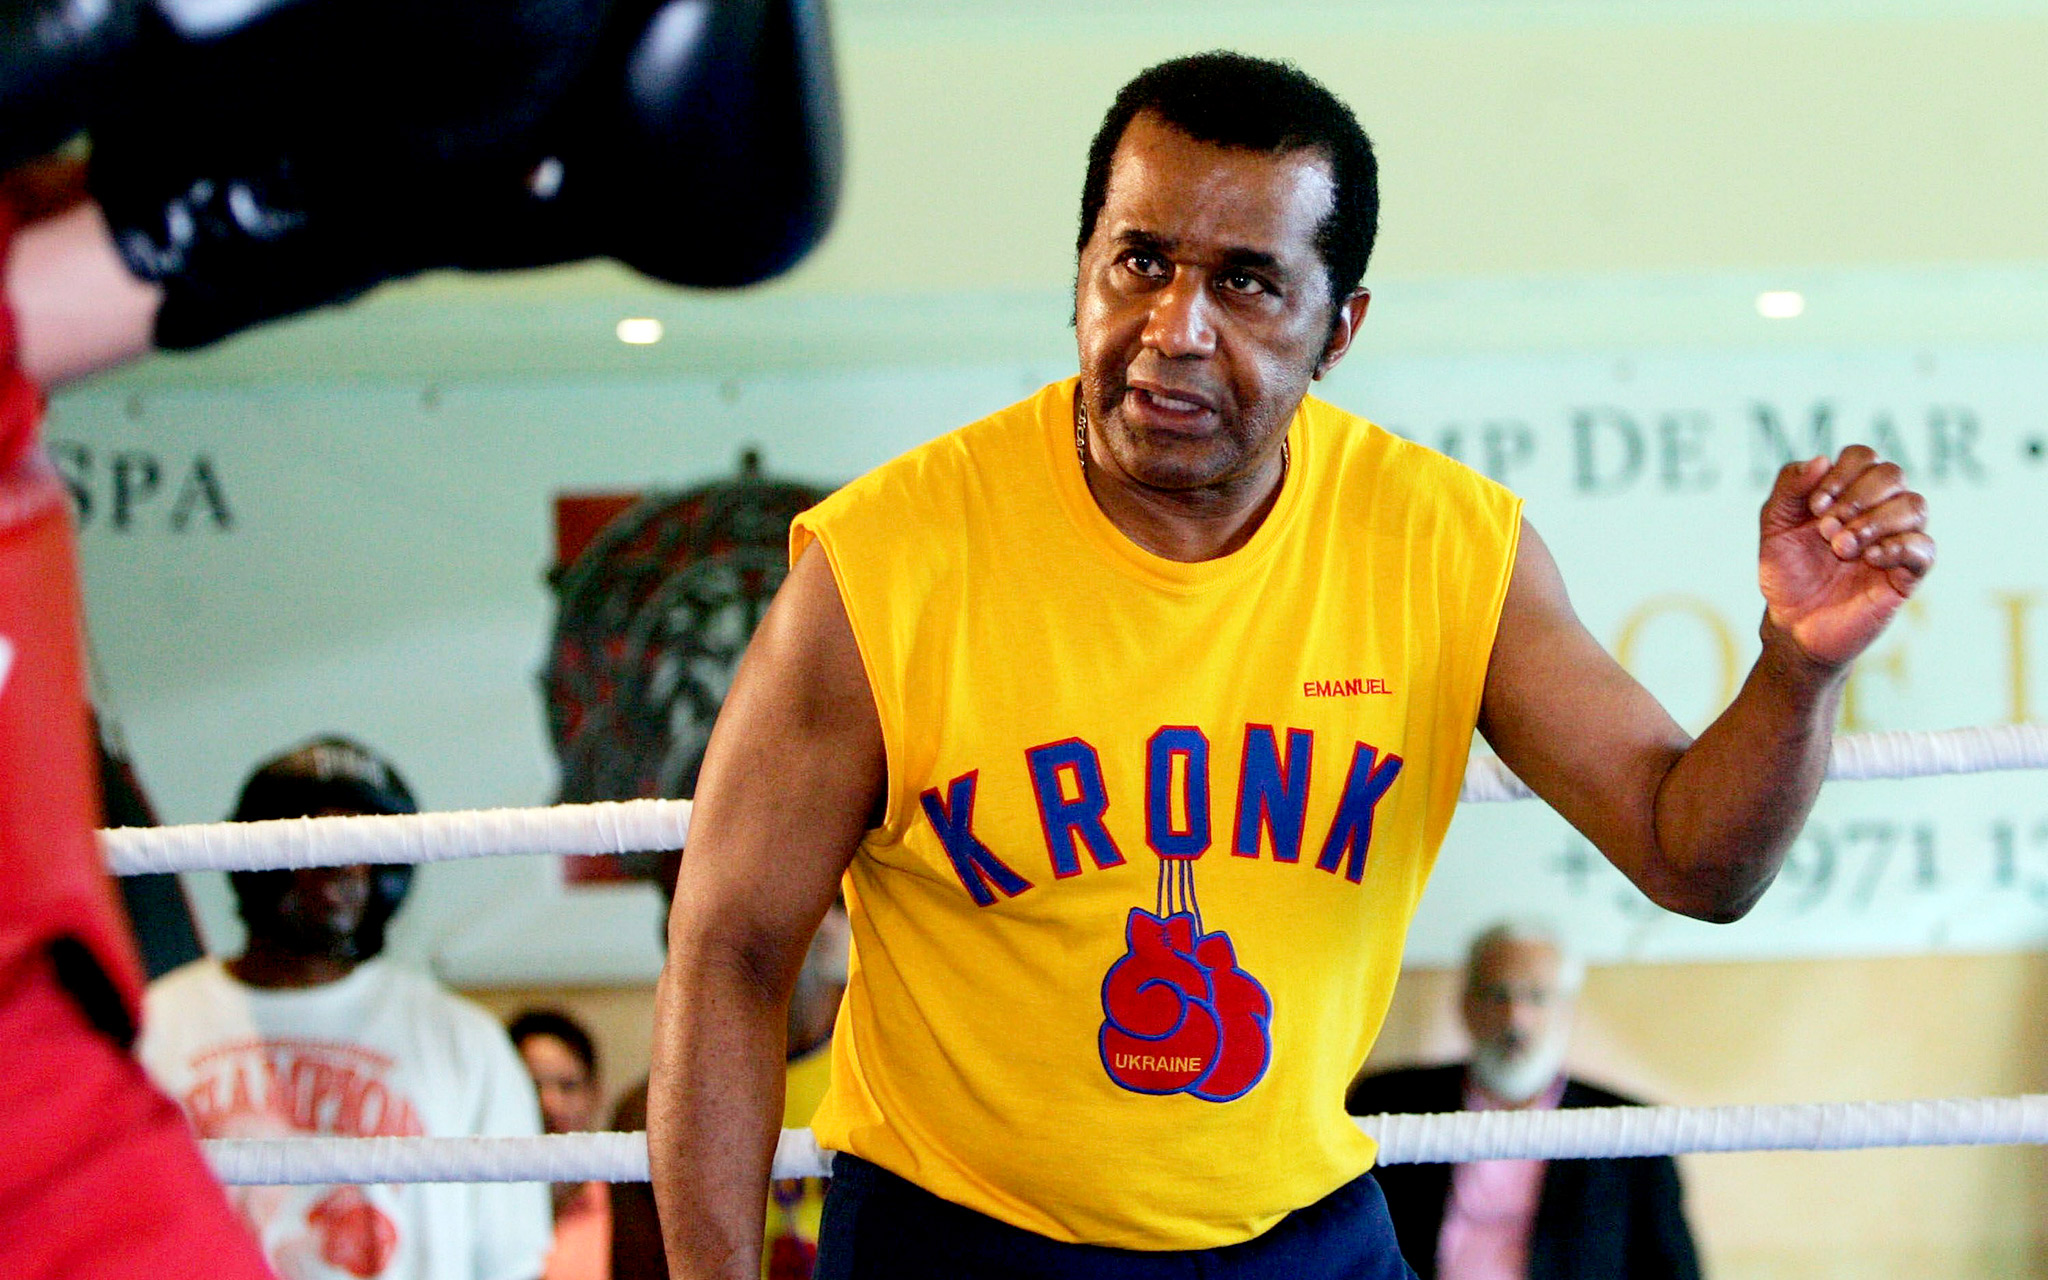 Happy Birthday to the Late-Great Trainer, Emanuel Steward